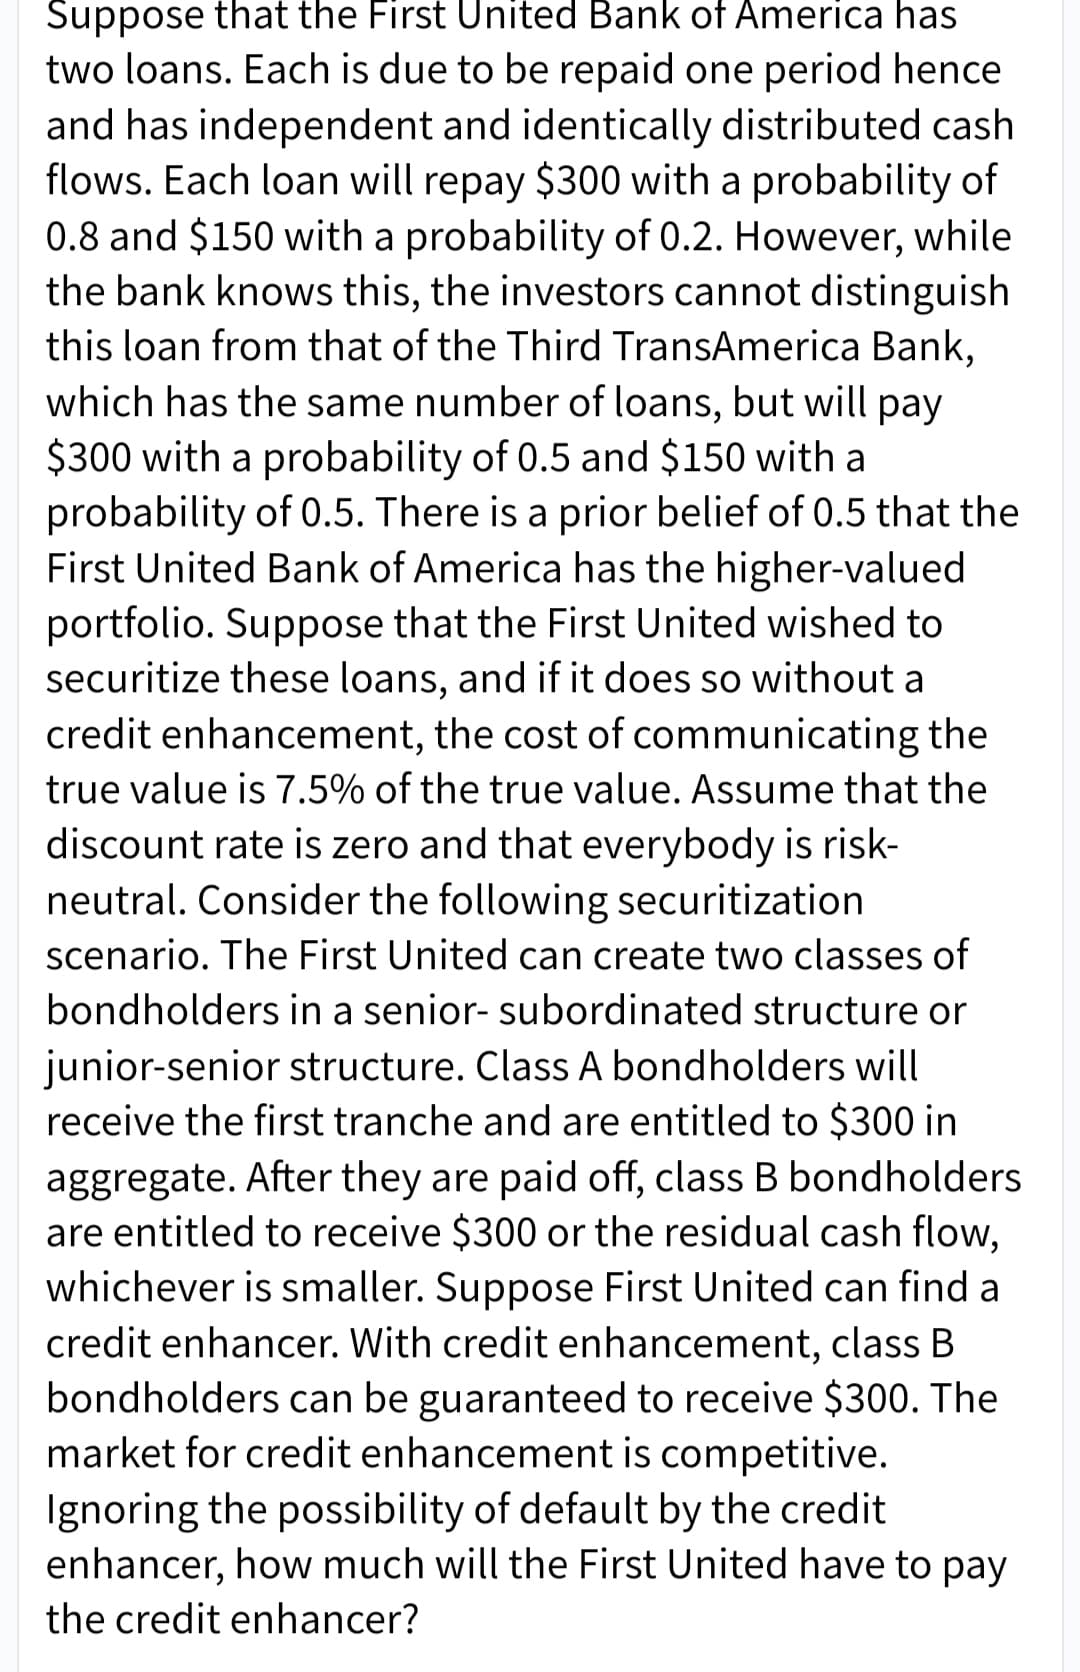 Suppose that the First United Bank of America has
two loans. Each is due to be repaid one period hence
and has independent and identically distributed cash
flows. Each loan will repay $300 with a probability of
0.8 and $150 with a probability of 0.2. However, while
the bank knows this, the investors cannot distinguish
this loan from that of the Third TransAmerica Bank,
which has the same number of loans, but will pay
$300 with a probability of 0.5 and $150 with a
probability of 0.5. There is a prior belief of 0.5 that the
First United Bank of America has the higher-valued
portfolio. Suppose that the First United wished to
securitize these loans, and if it does so without a
credit enhancement, the cost of communicating the
true value is 7.5% of the true value. Assume that the
discount rate is zero and that everybody is risk-
neutral. Consider the following securitization
scenario. The First United can create two classes of
bondholders in a senior- subordinated structure or
junior-senior structure. Class A bondholders will
receive the first tranche and are entitled to $300 in
aggregate. After they are paid off, class B bondholders
are entitled to receive $300 or the residual cash flow,
whichever is smaller. Suppose First United can find a
credit enhancer. With credit enhancement, class B
bondholders can be guaranteed to receive $300. The
market for credit enhancement is competitive.
Ignoring the possibility of default by the credit
enhancer, how much will the First United have to pay
the credit enhancer?